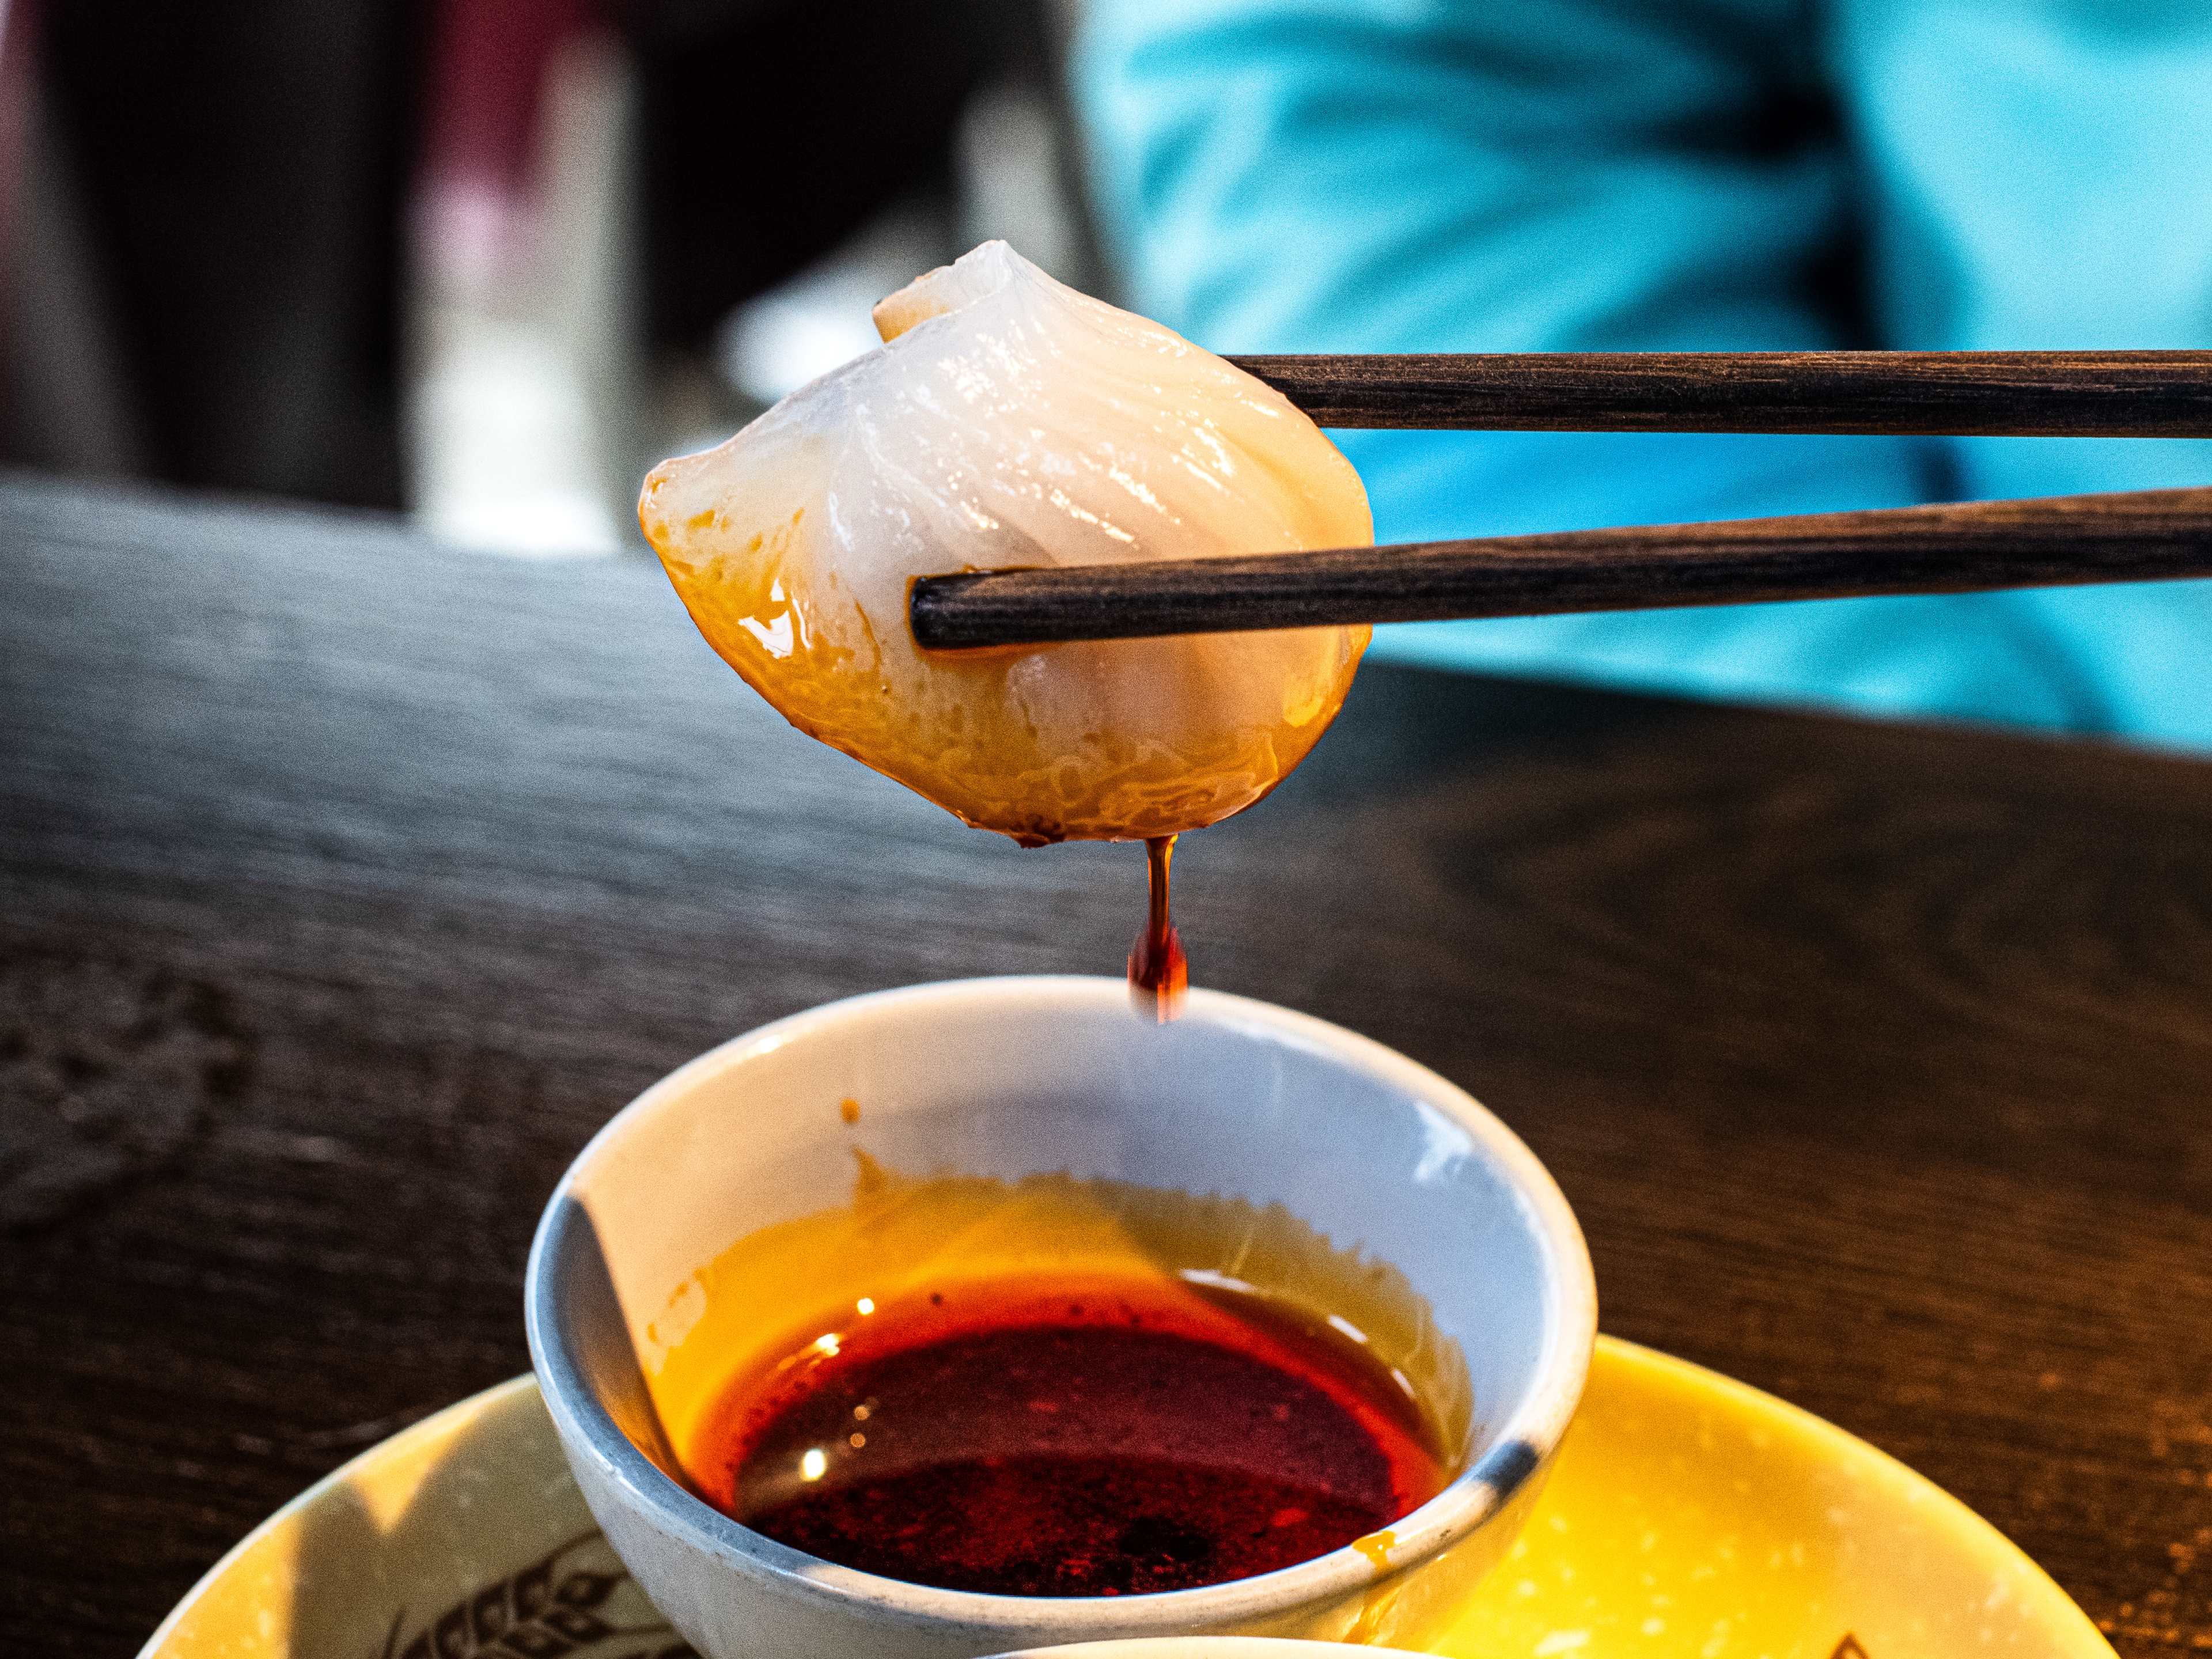 A prawn and scallop dumpling dipped in sauce at Sichuan Popo.